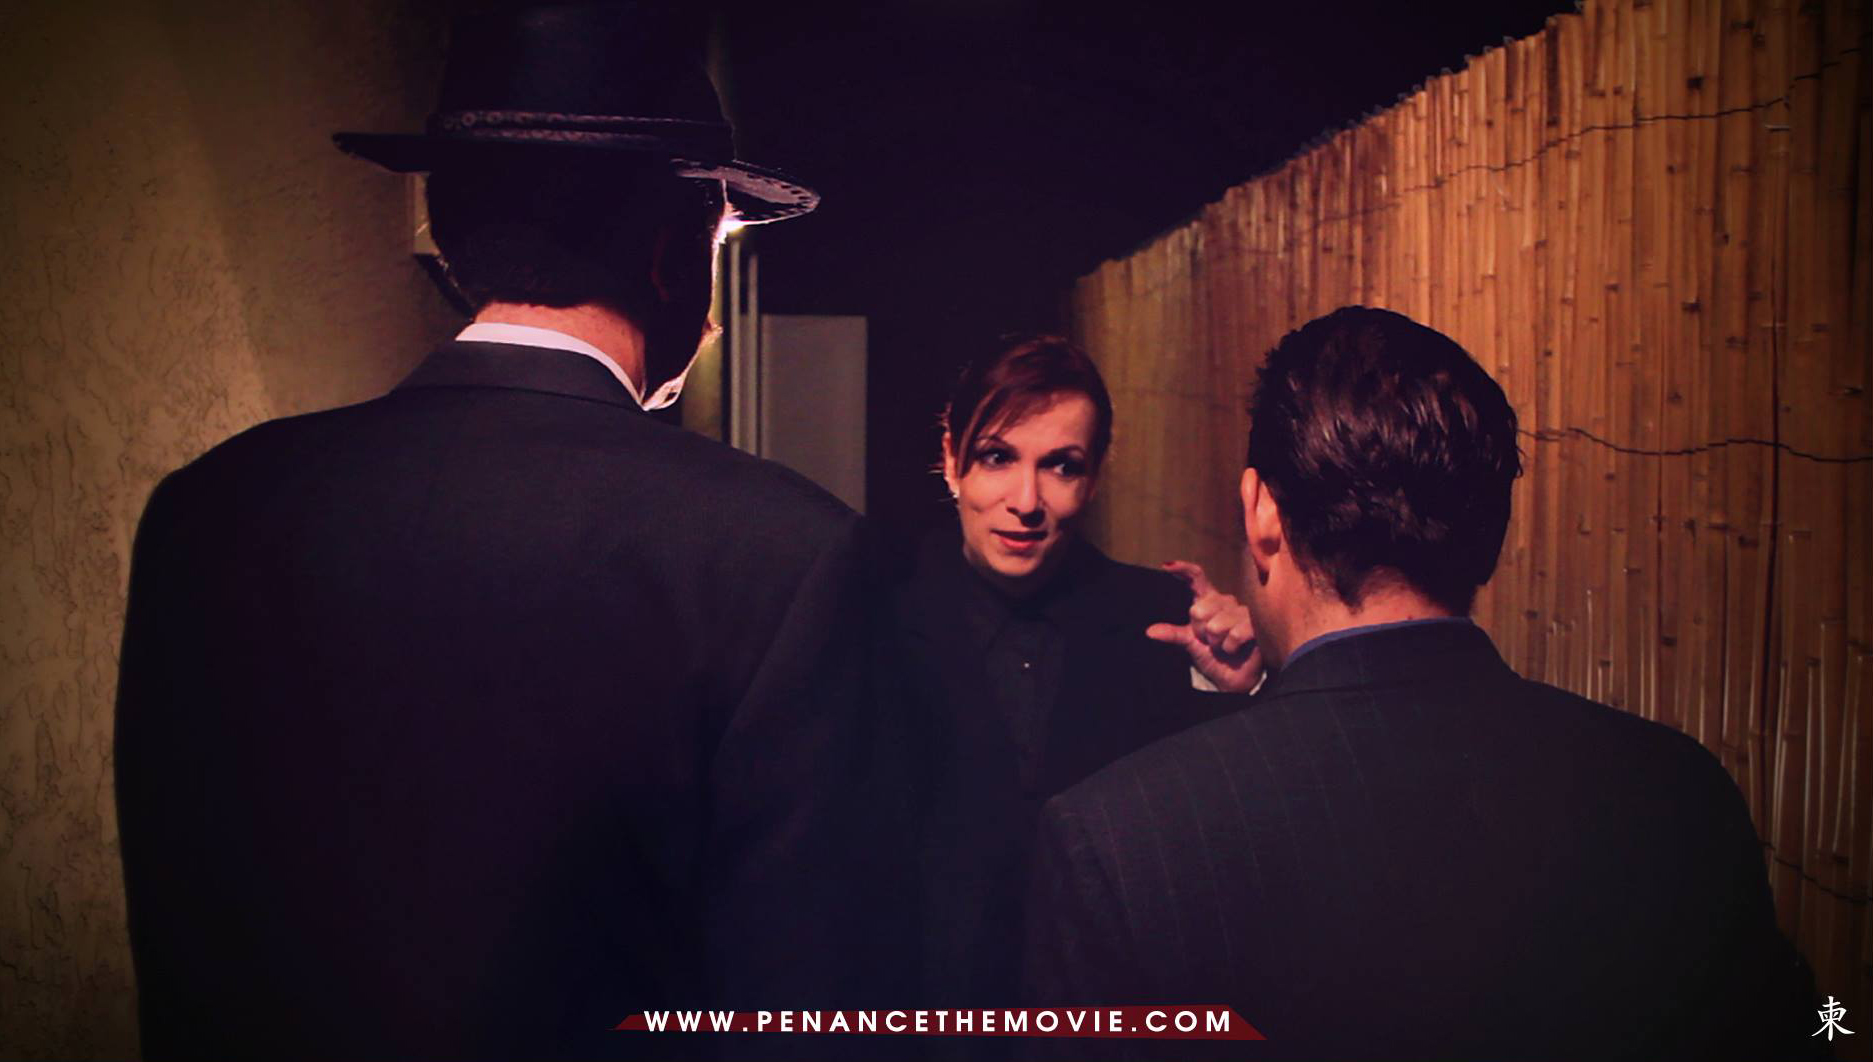 Pia Thrasher as Helena Gruber in 'Penance'